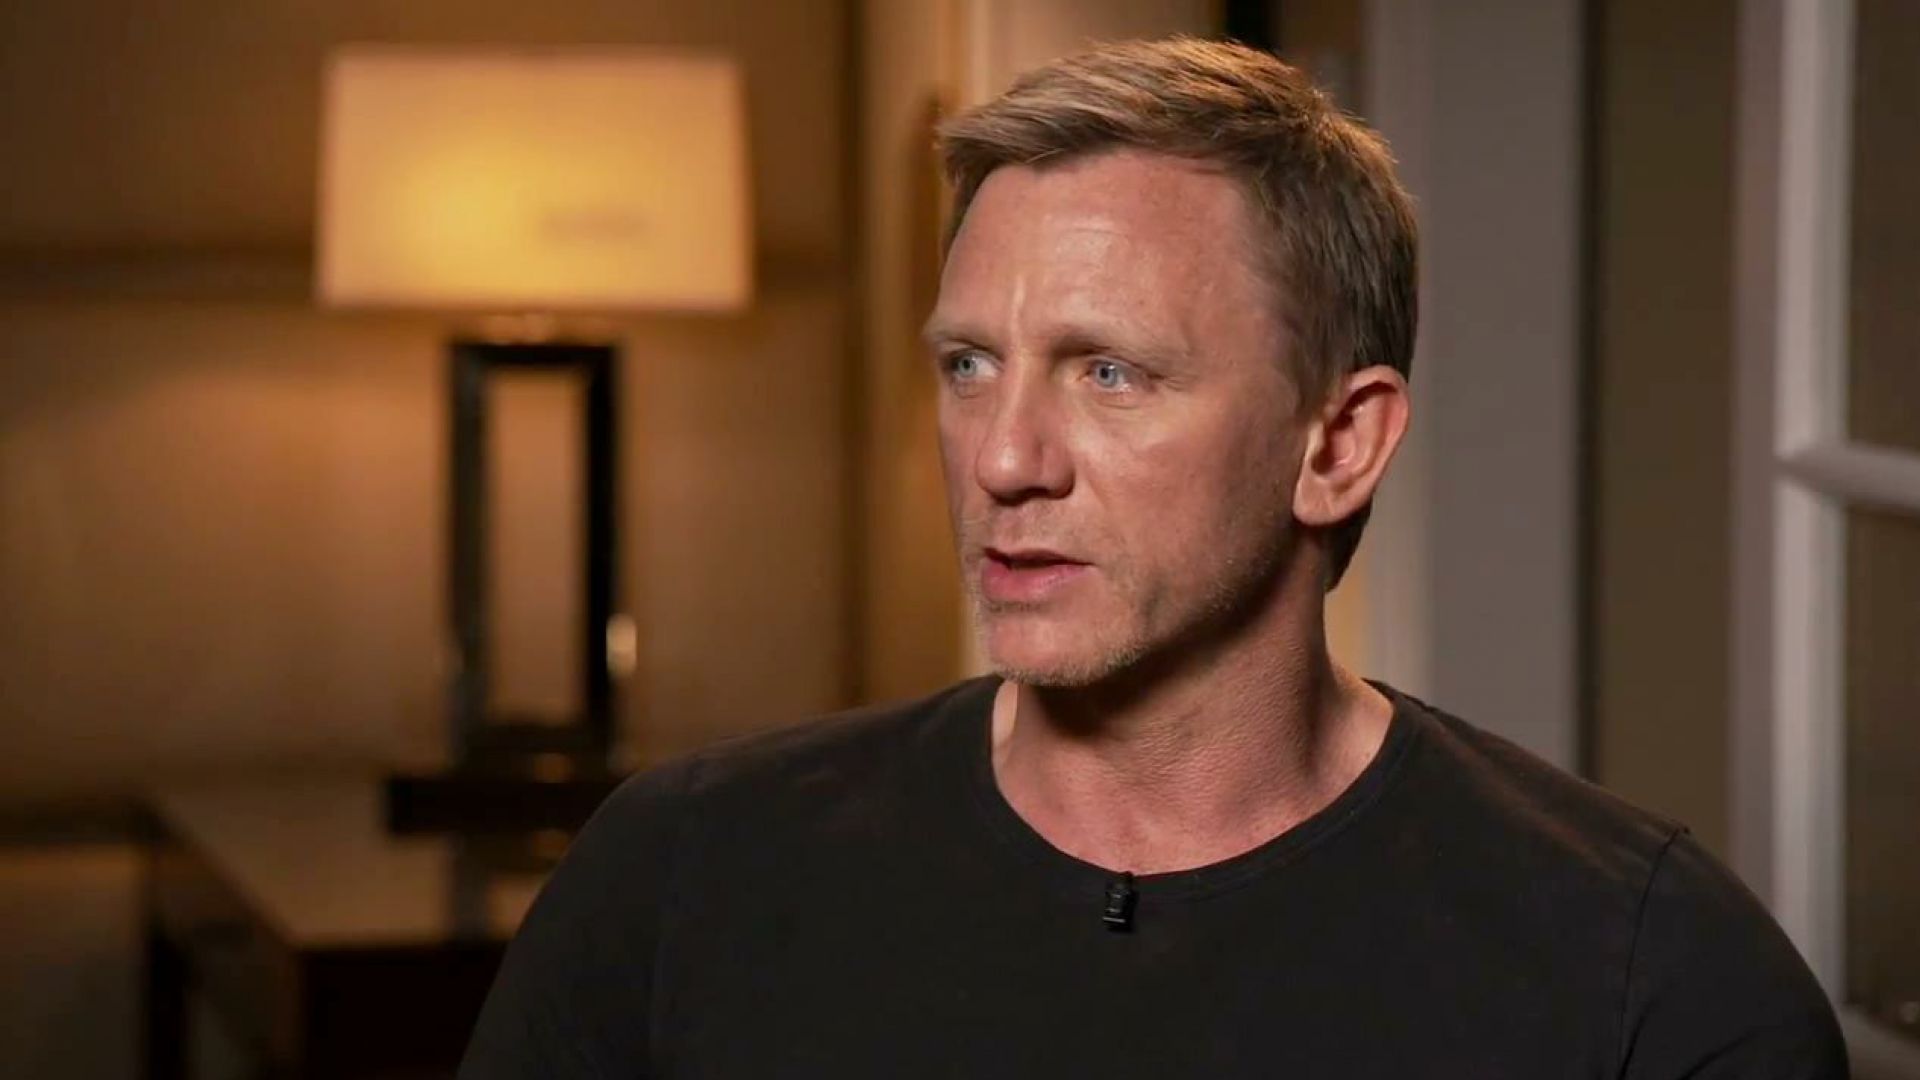 Daniel Craig talks about the movie and his character in Girl with the Dragon Tattoo